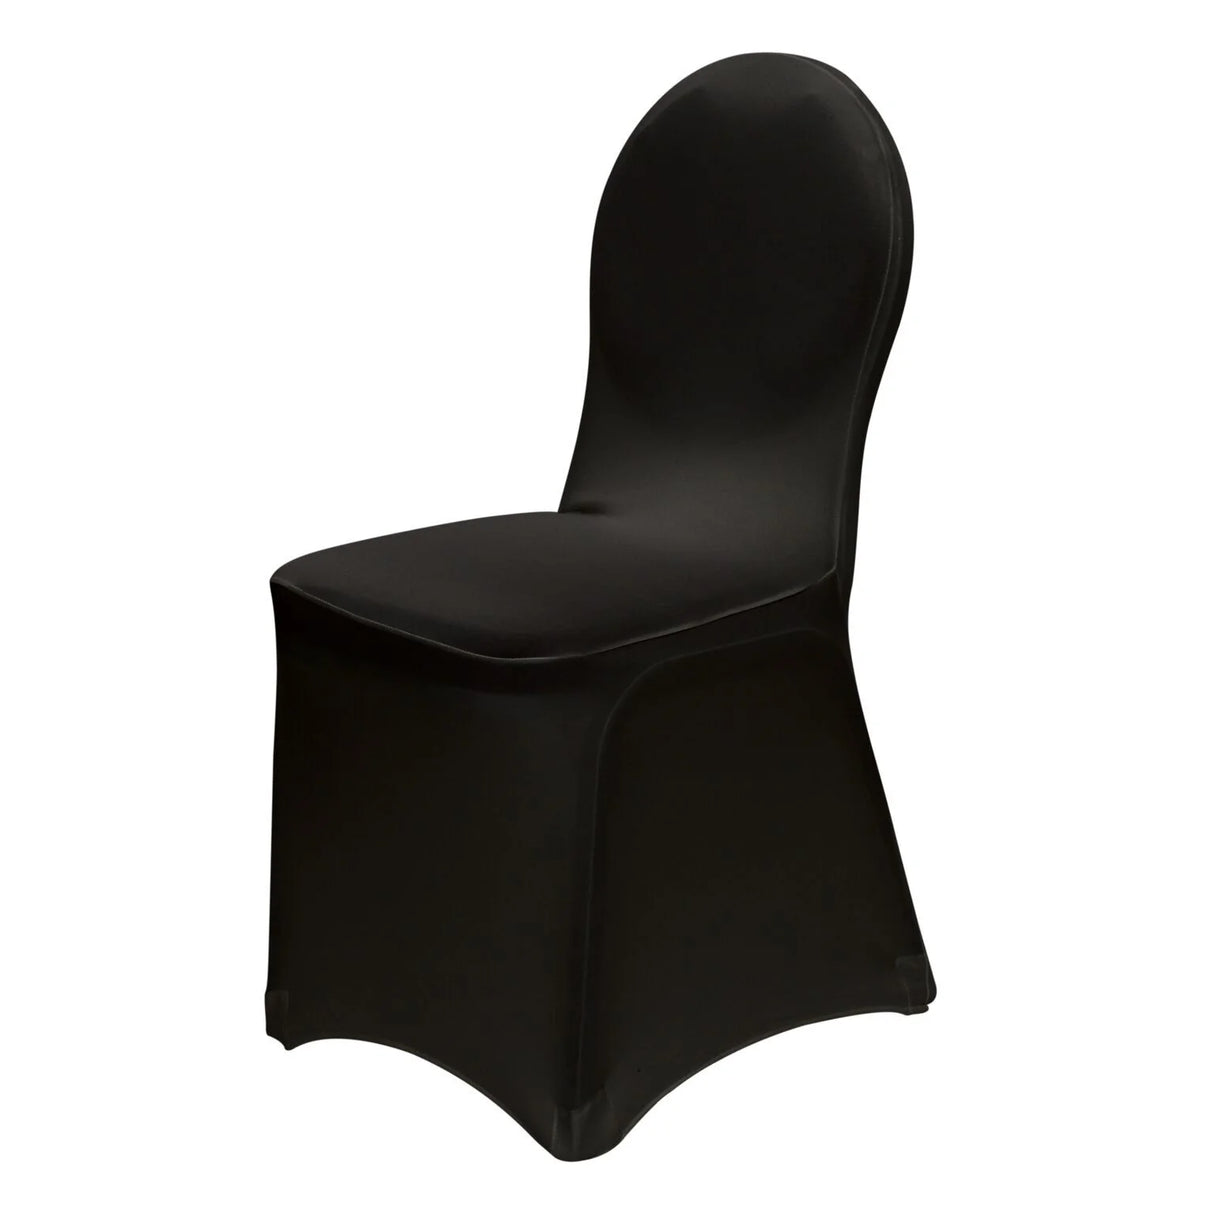 Black chair cover placed on a chair.